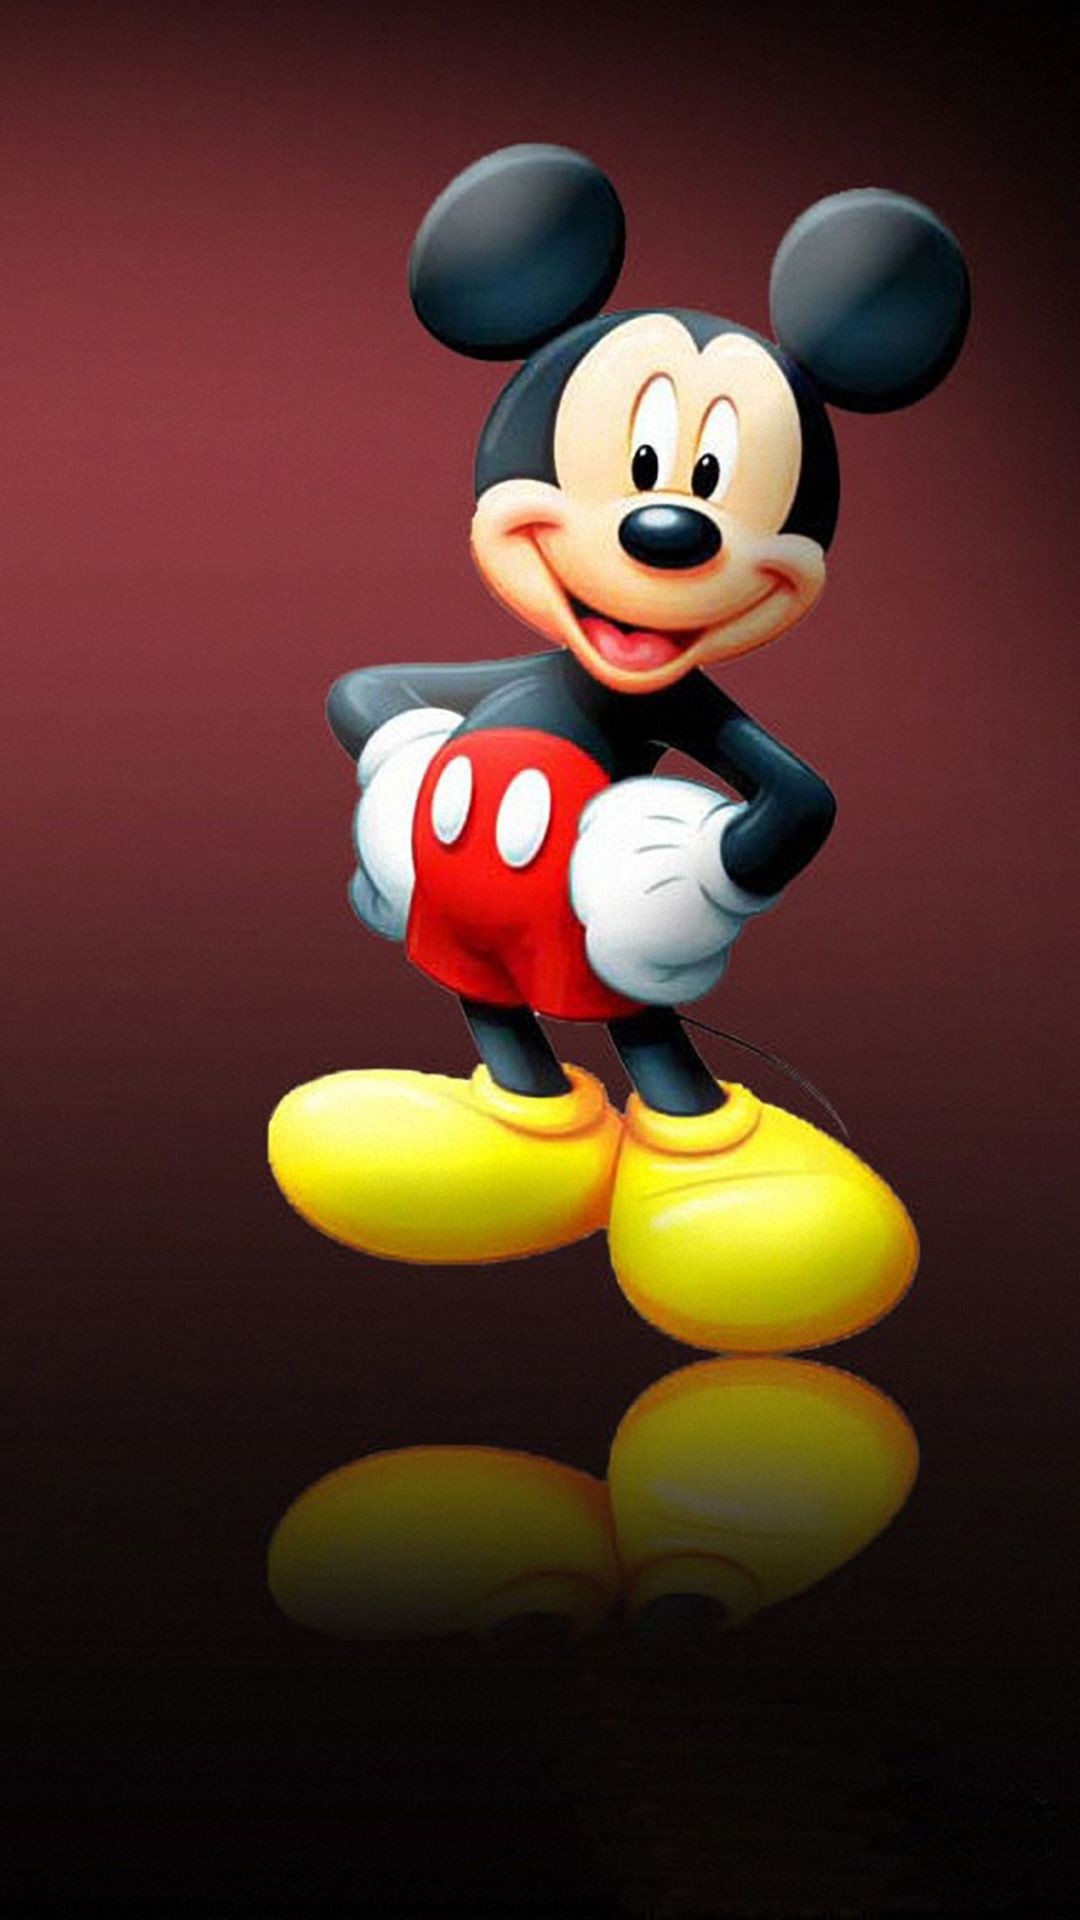 1080x1920 Mickey Mouse Disney iPhone Background Wallpaper phone Android HD